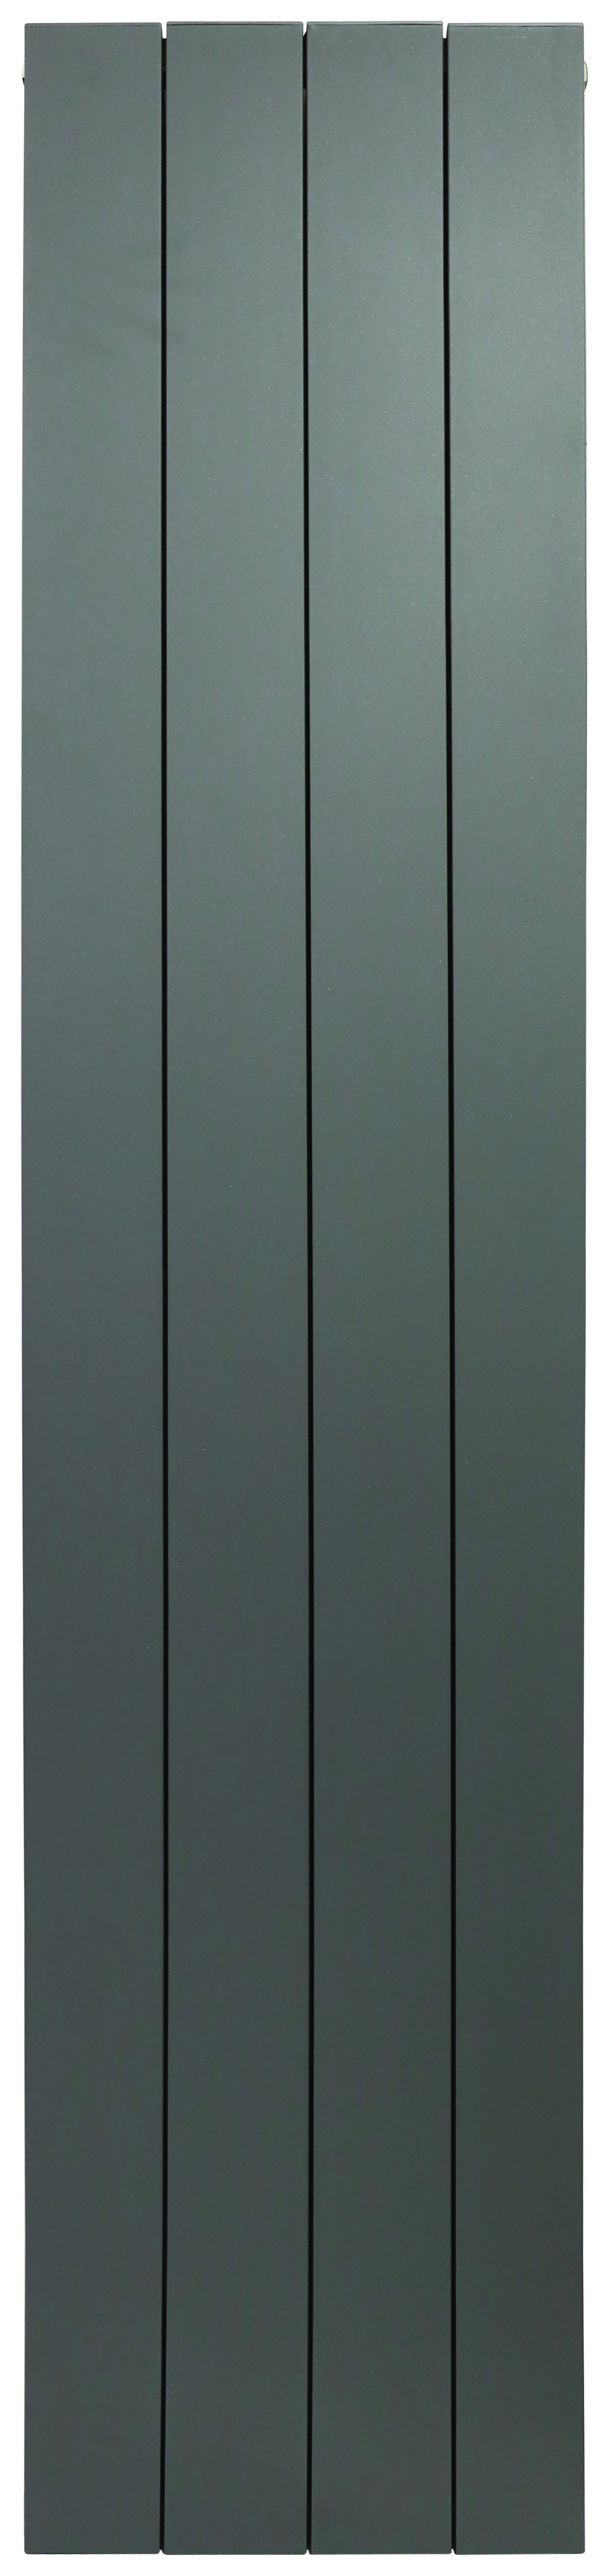 Image of Towelrads Anthracite Grey Ascot Double Vertical Designer Radiator - 1800 x 305mm